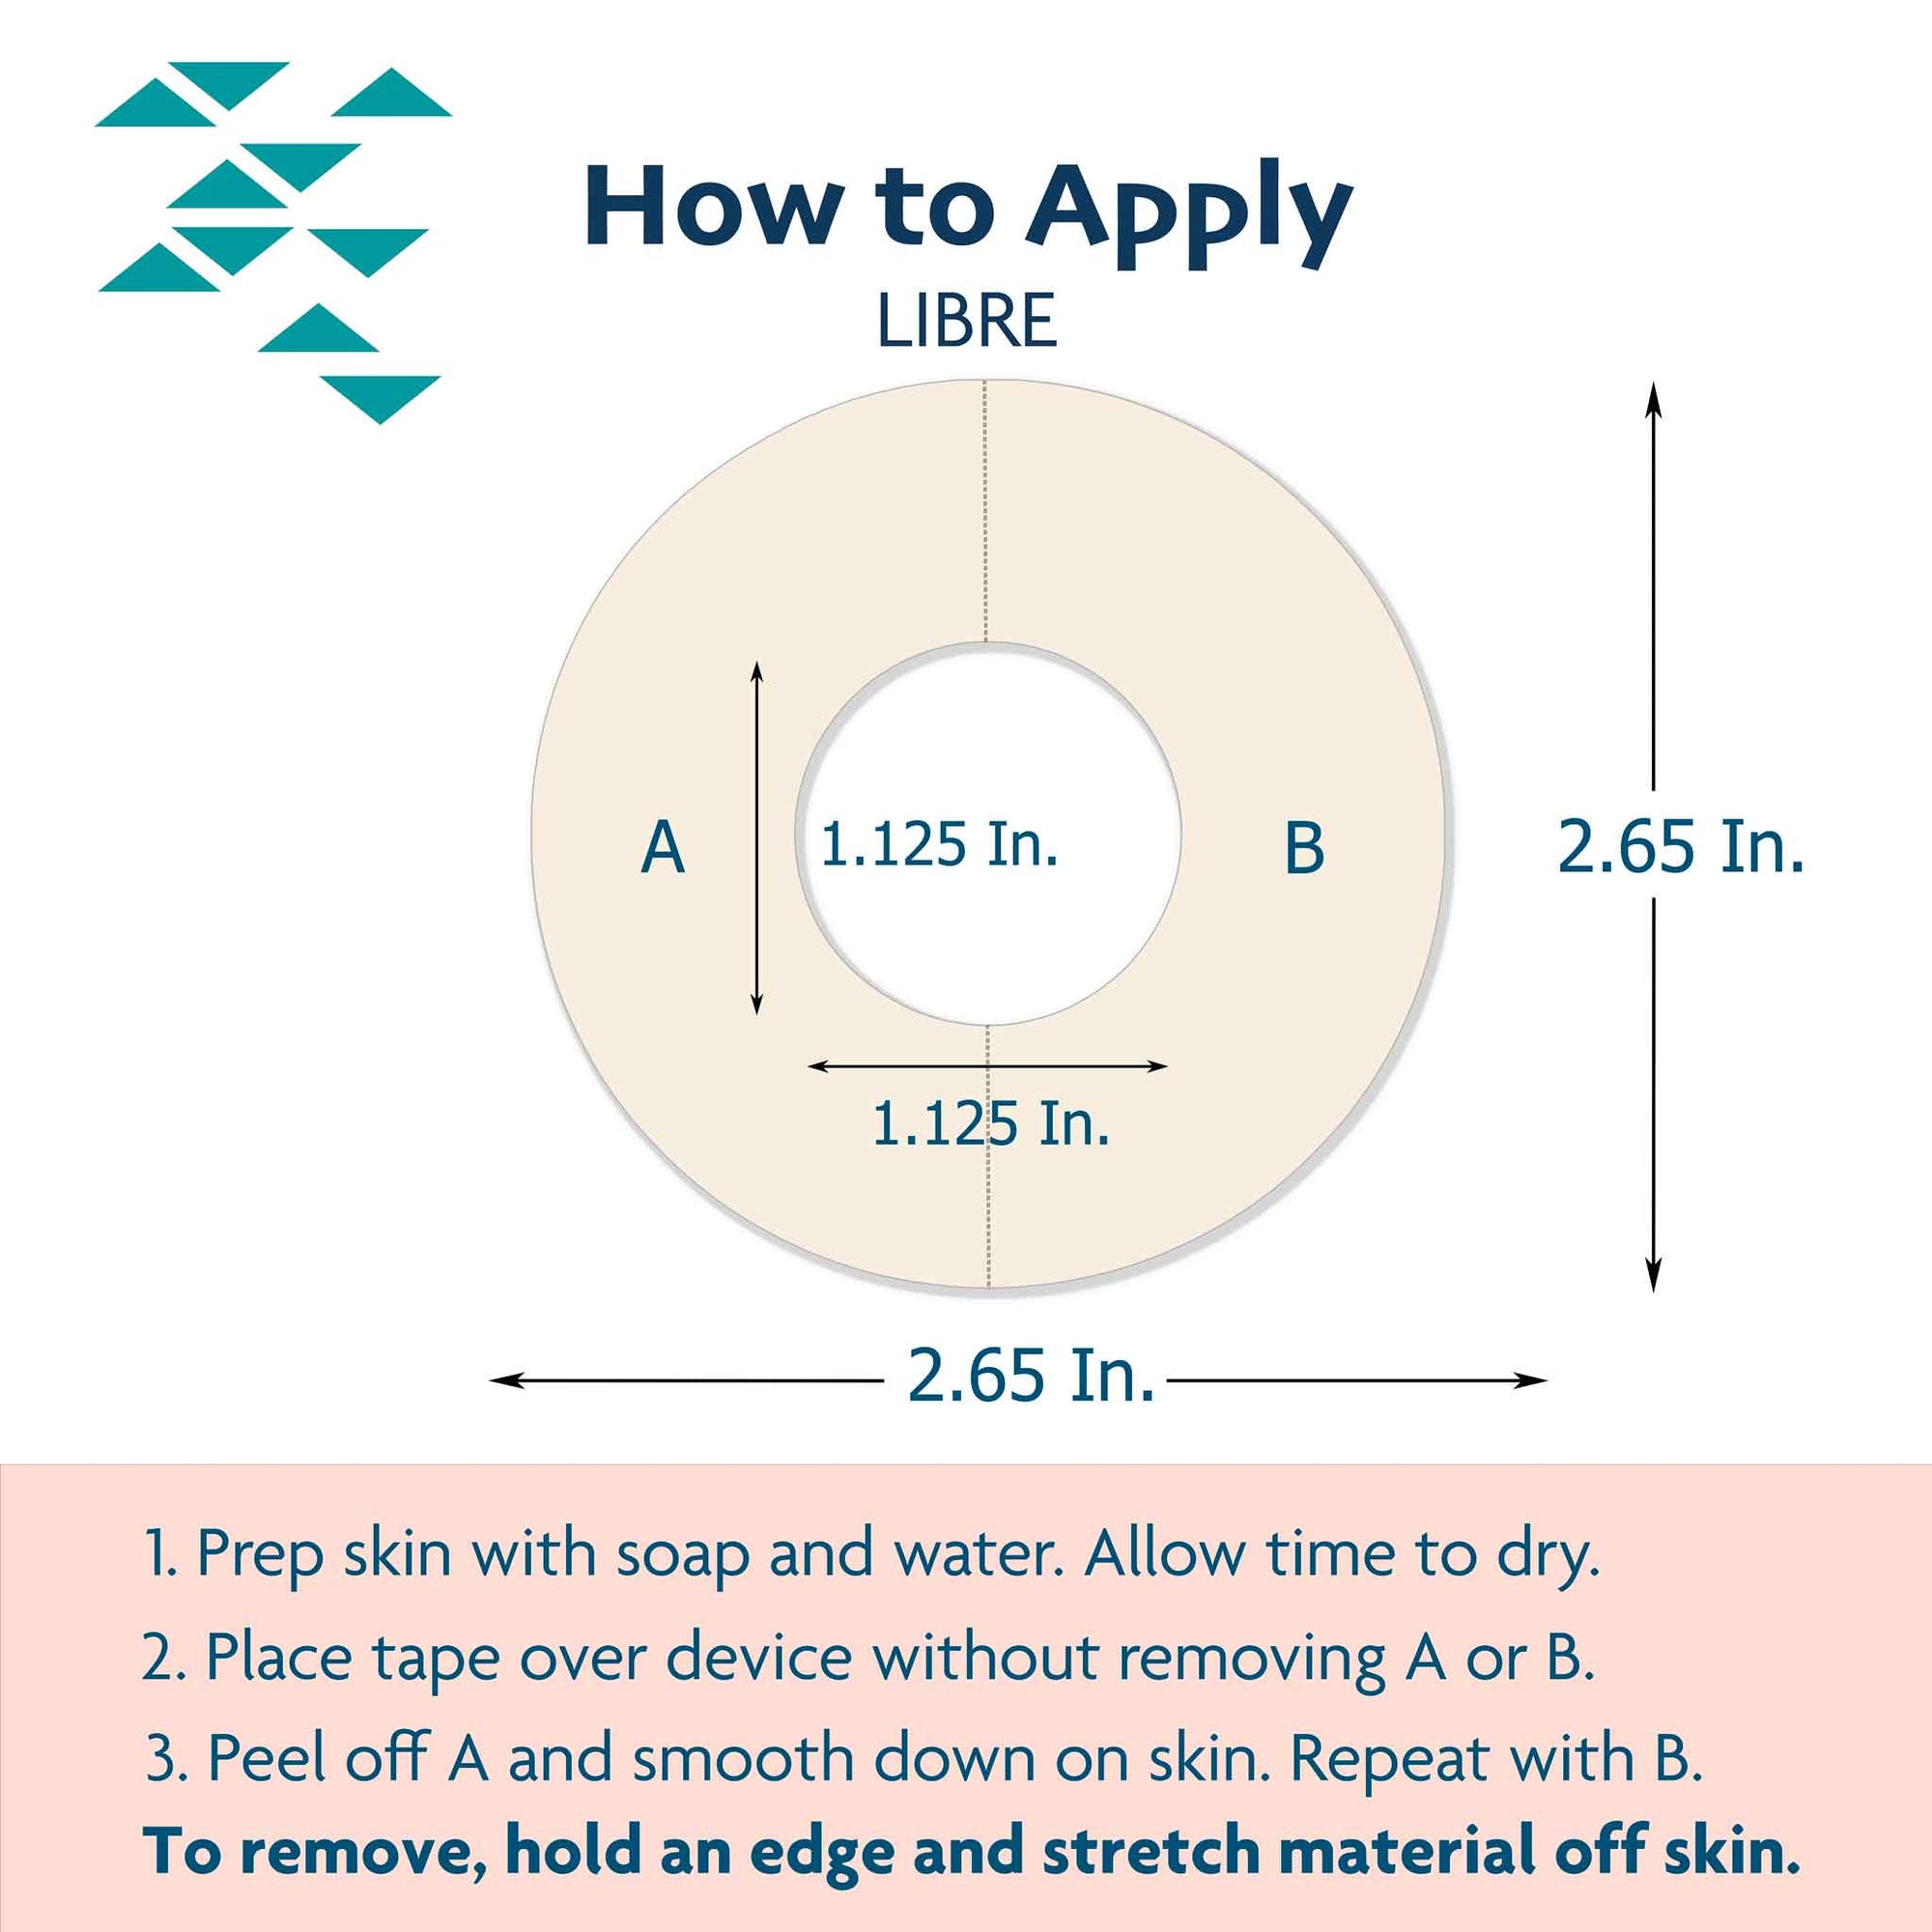 ExpressionMed Instructions for properly applying libre patch to CGM system, Abbott Lingo